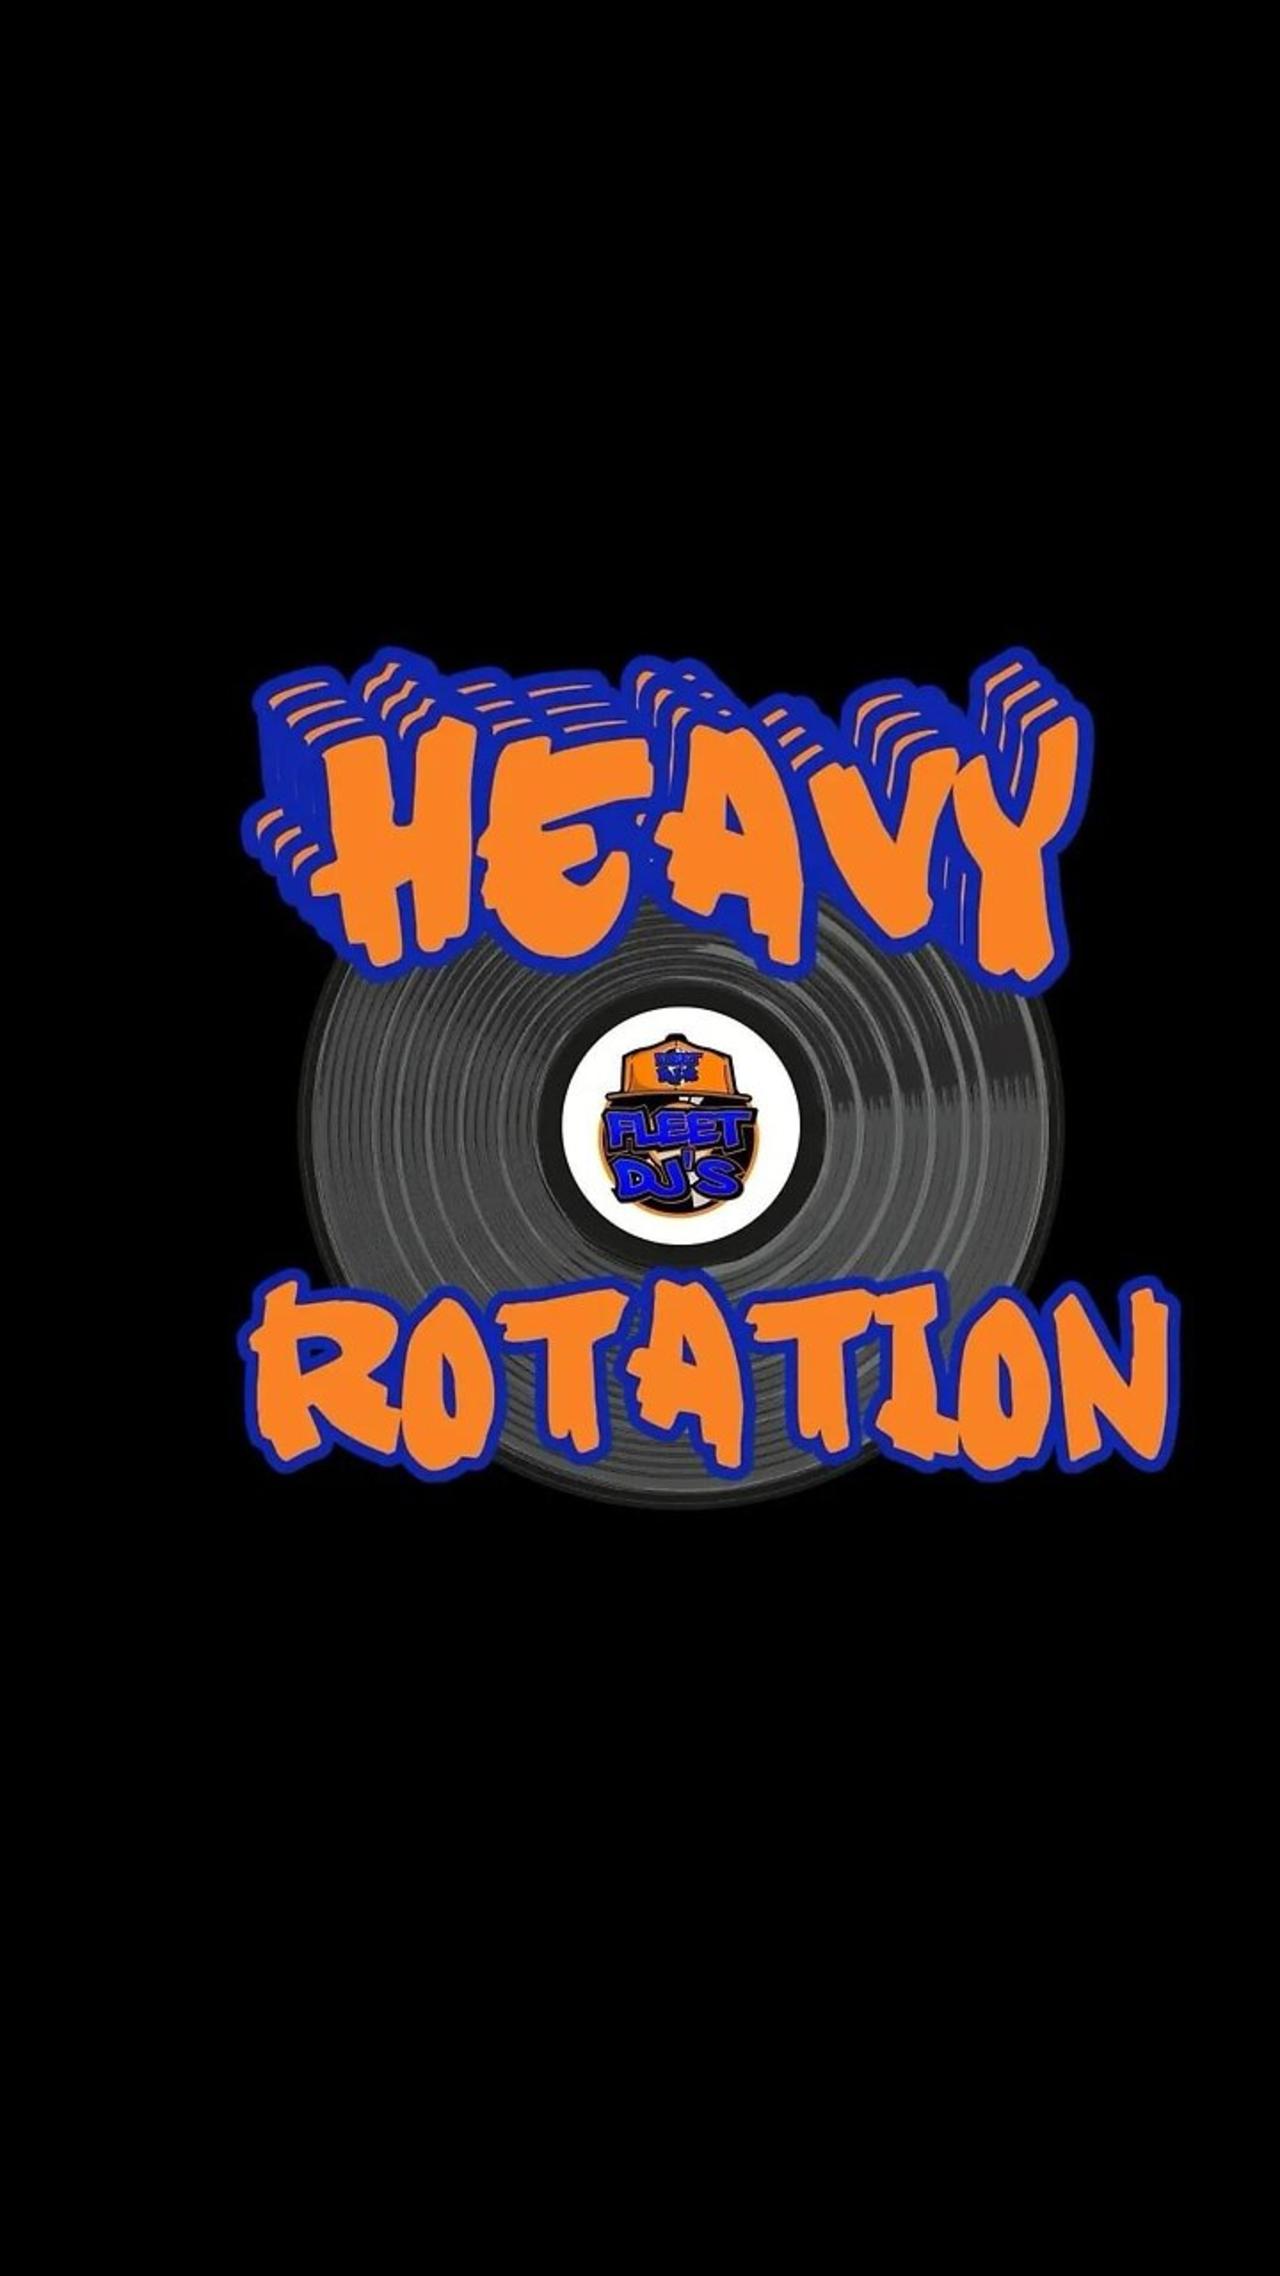 Heavy Rotation Live Reaction Coming Soon